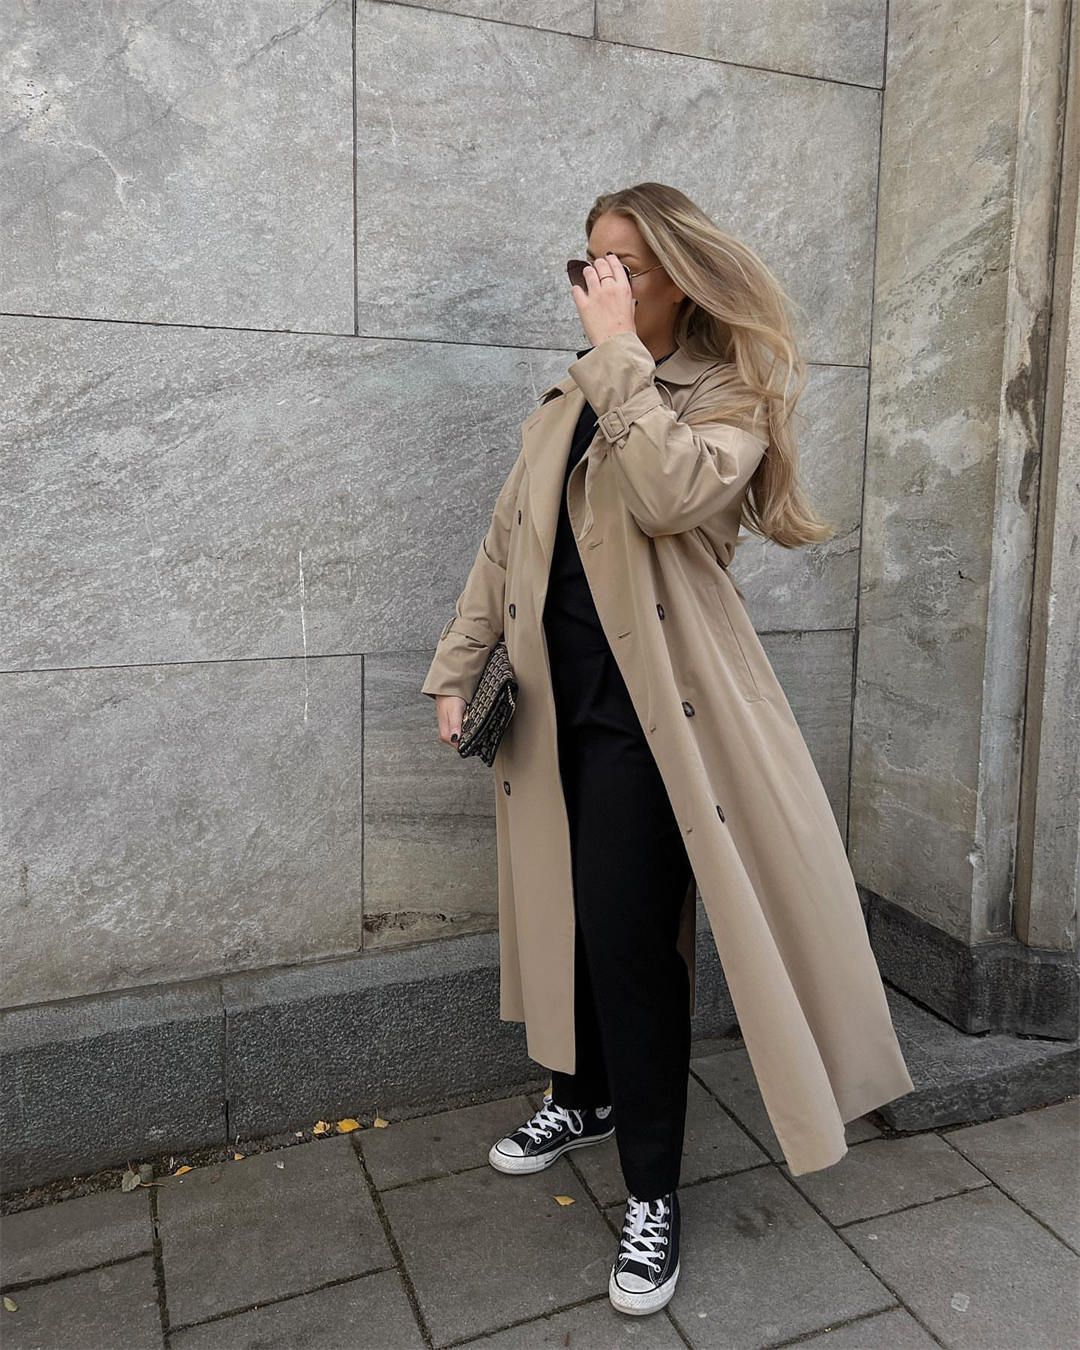 Trench Coat outfit ideas for women 17